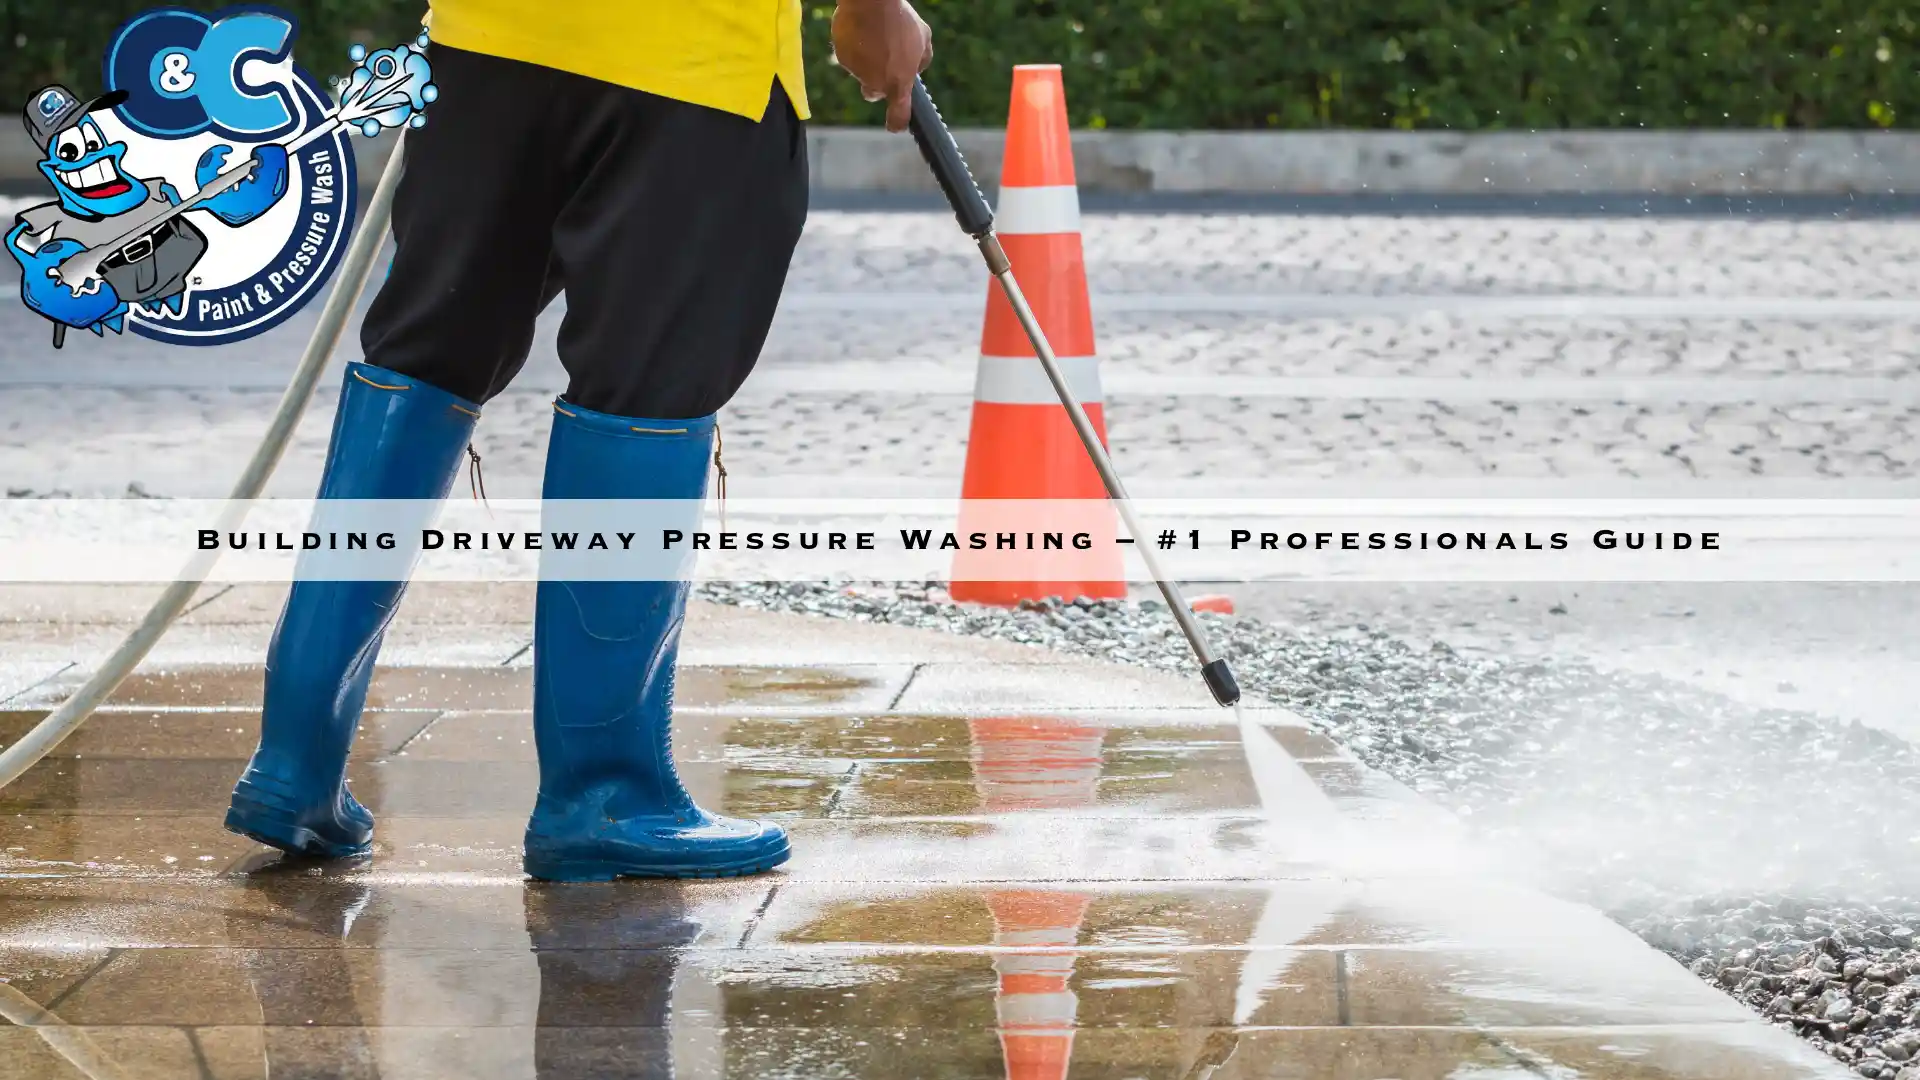 Building Driveway Pressure Washing - #1 Professionals Guide